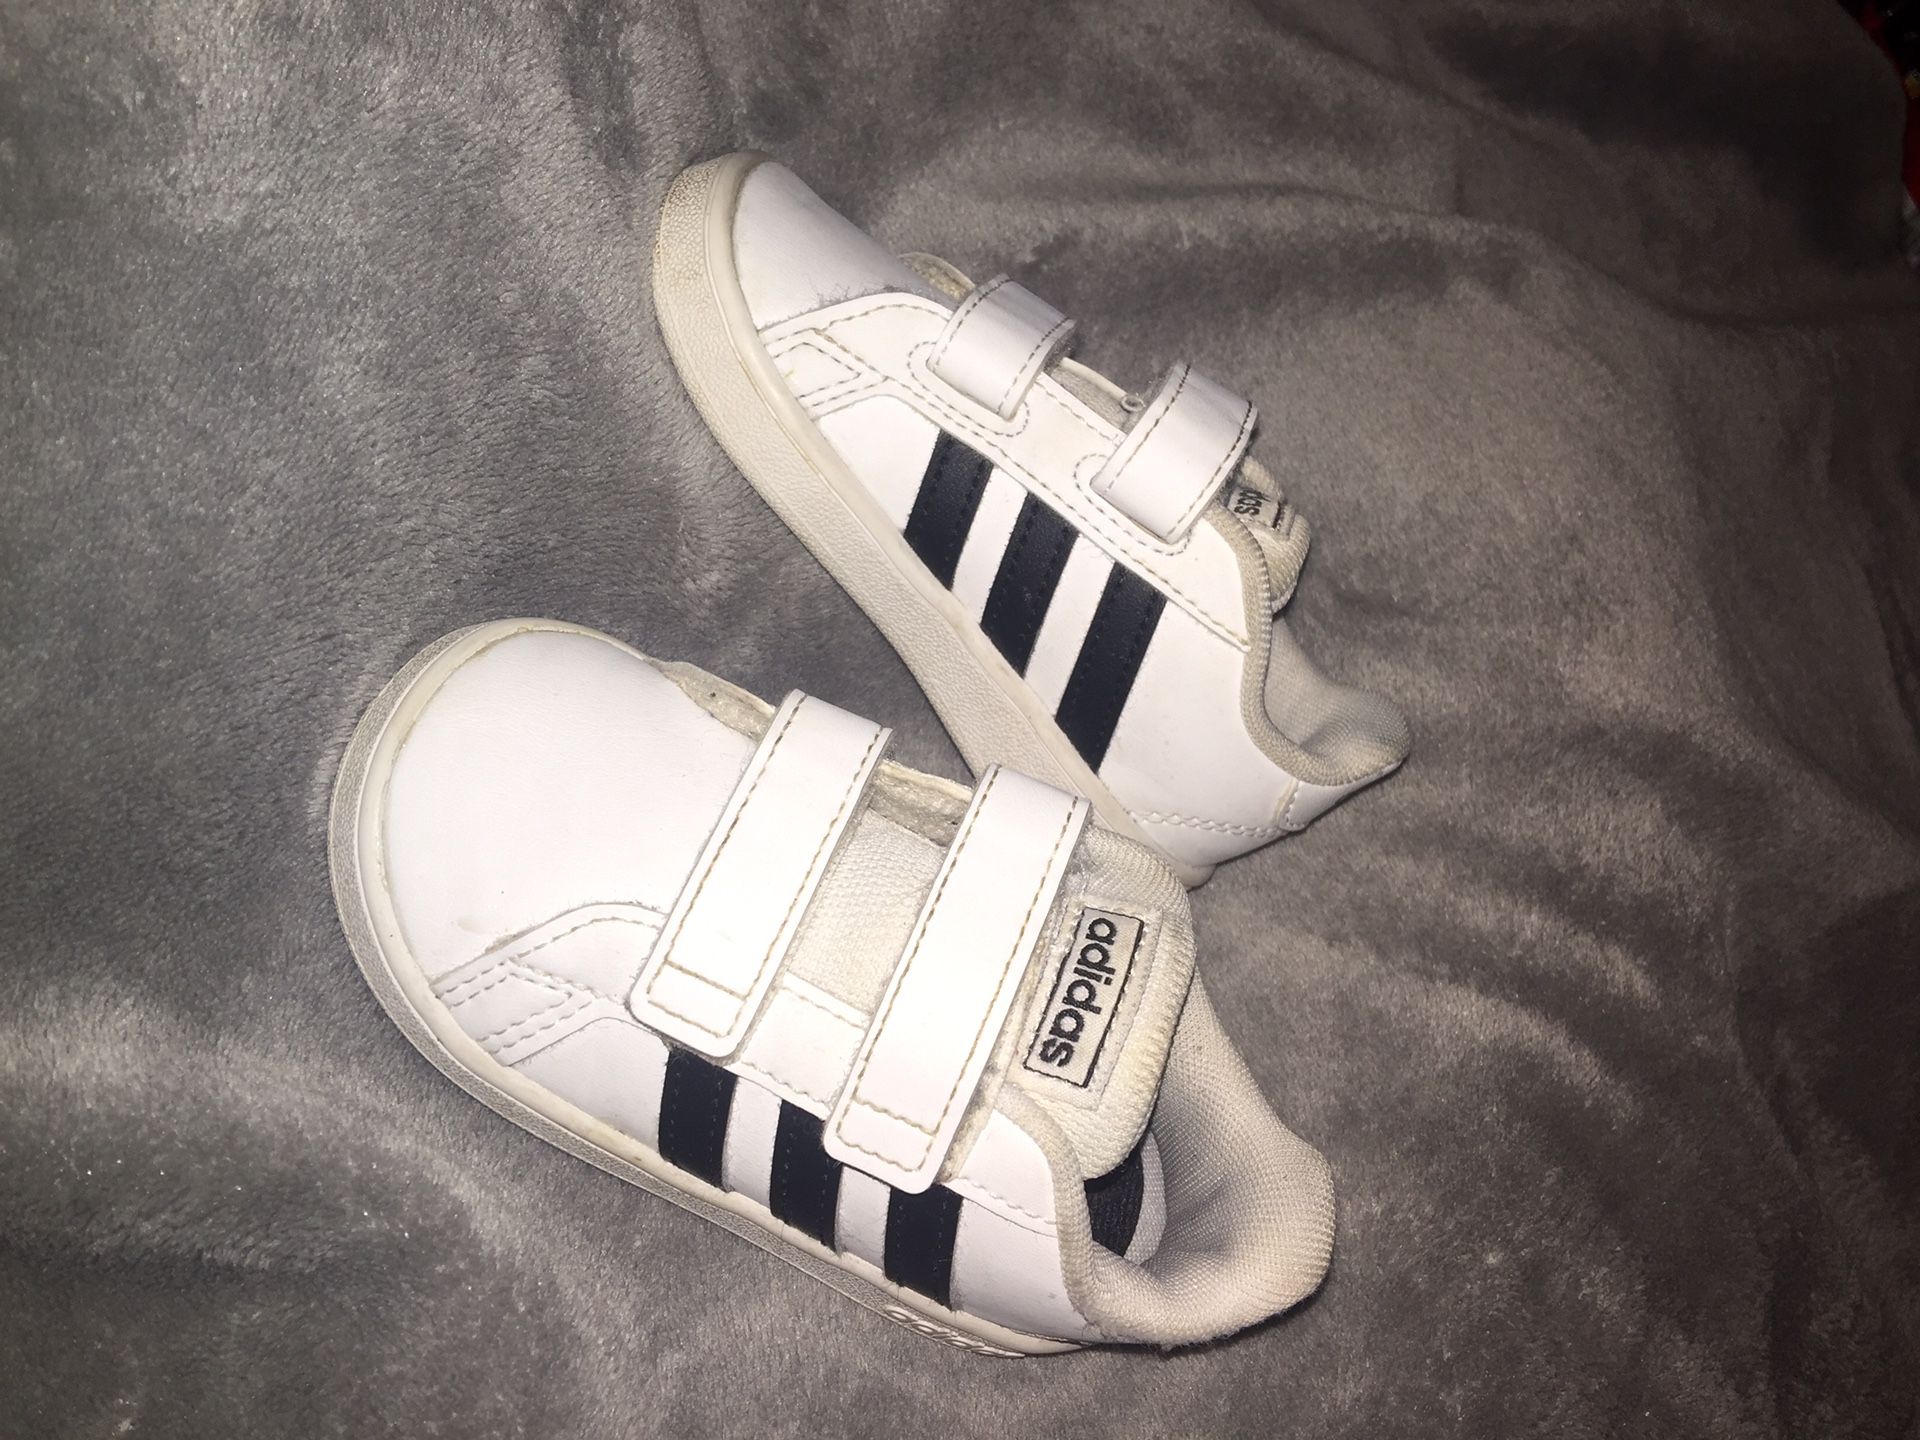 Adidas Toddler shoes size 6